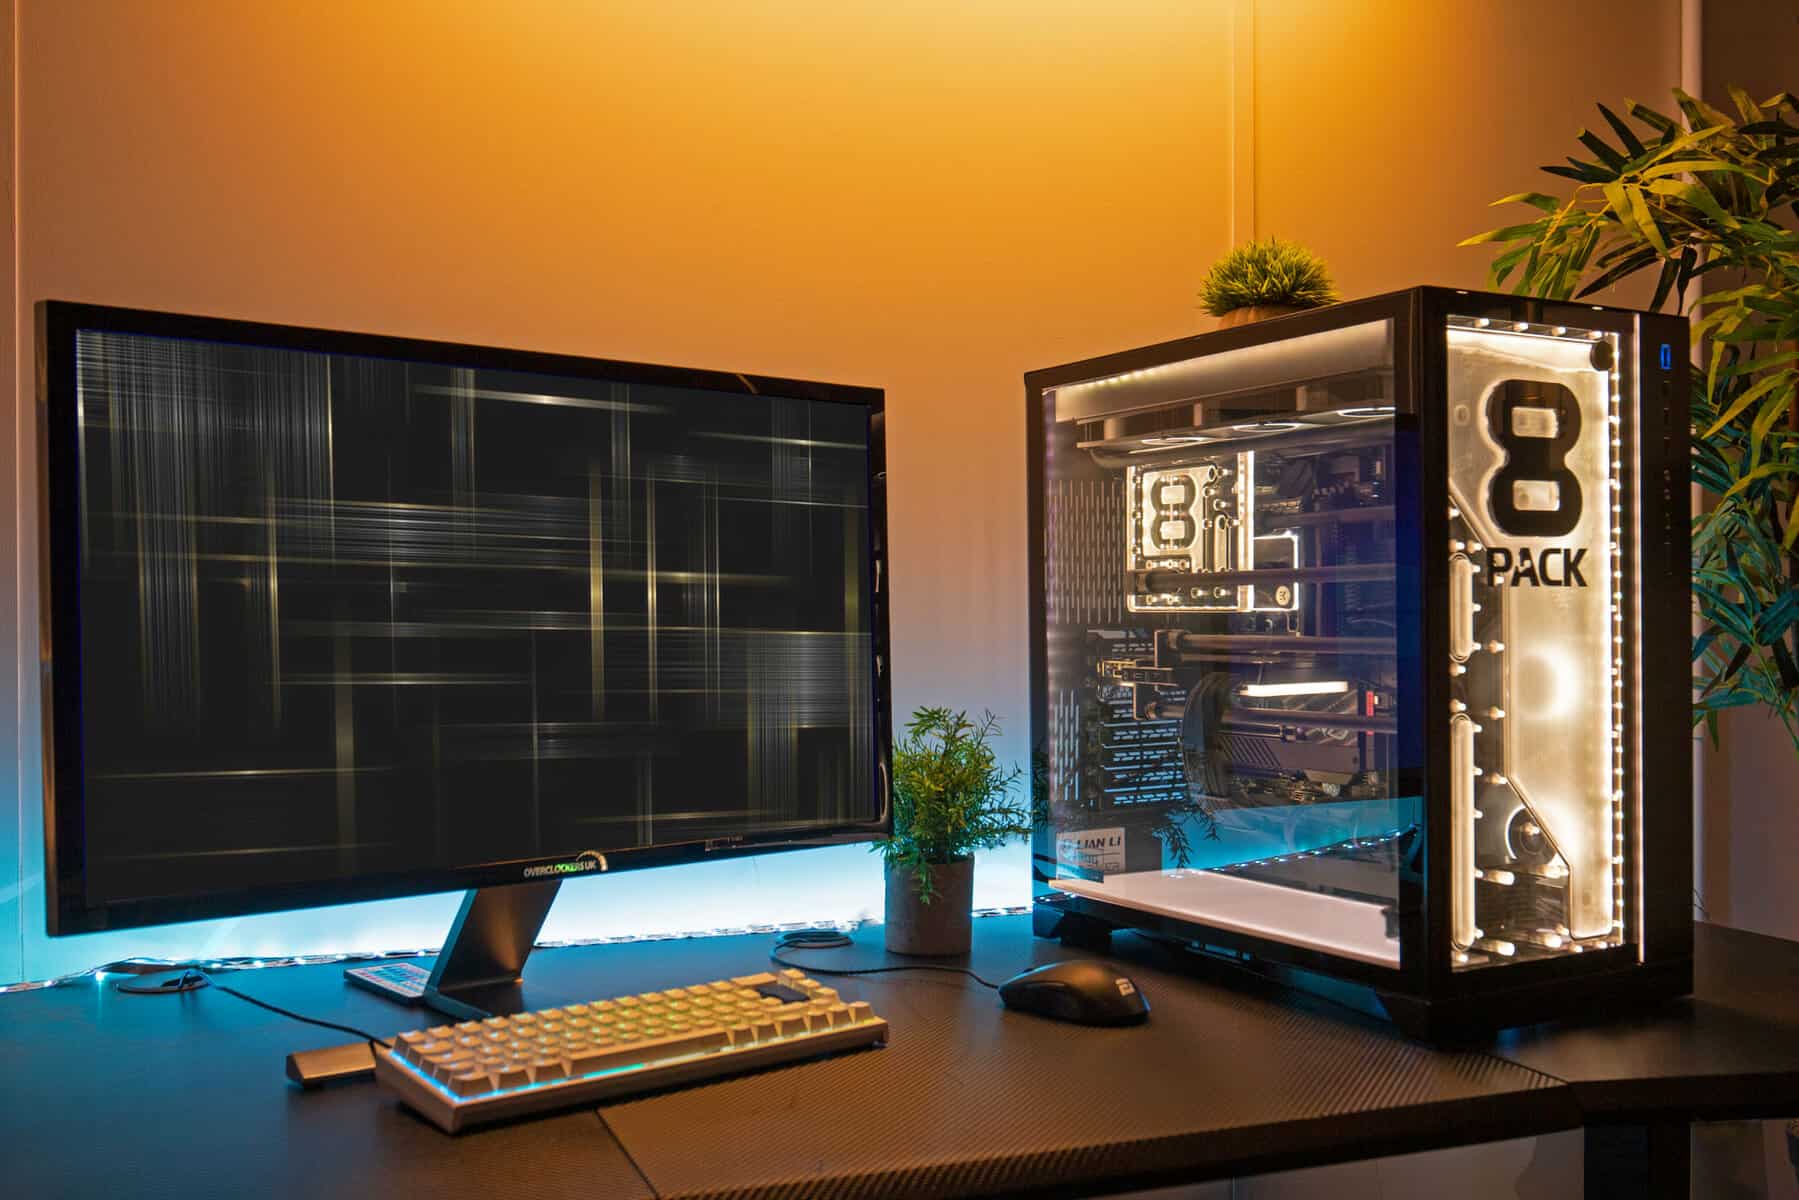 A setup of one of the most expensive pcs